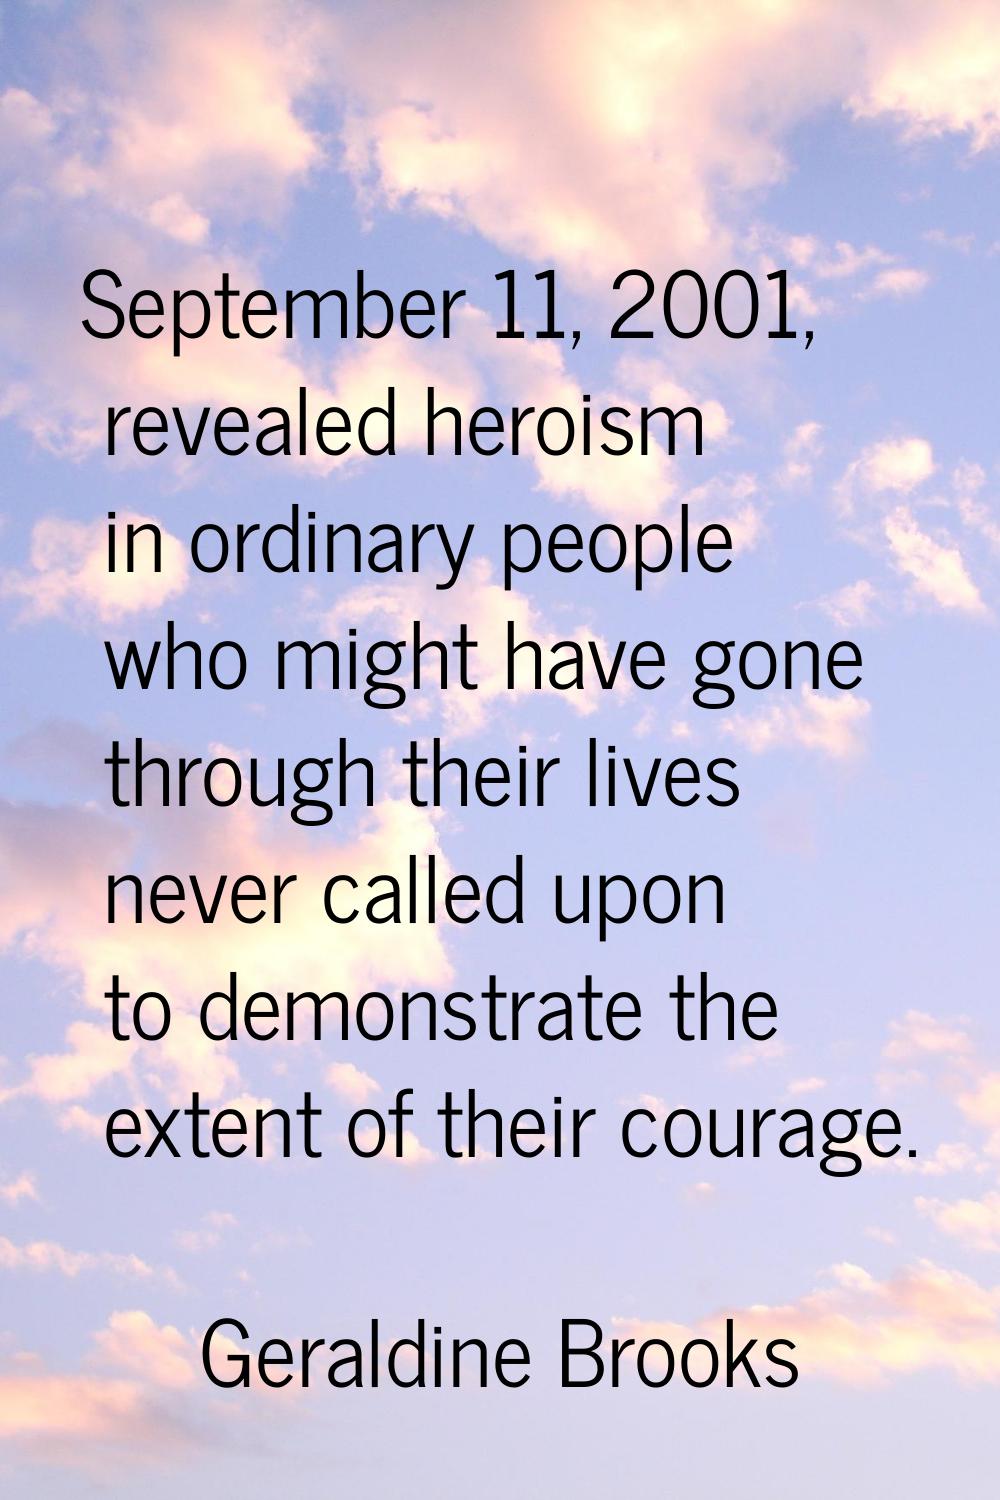 September 11, 2001, revealed heroism in ordinary people who might have gone through their lives nev